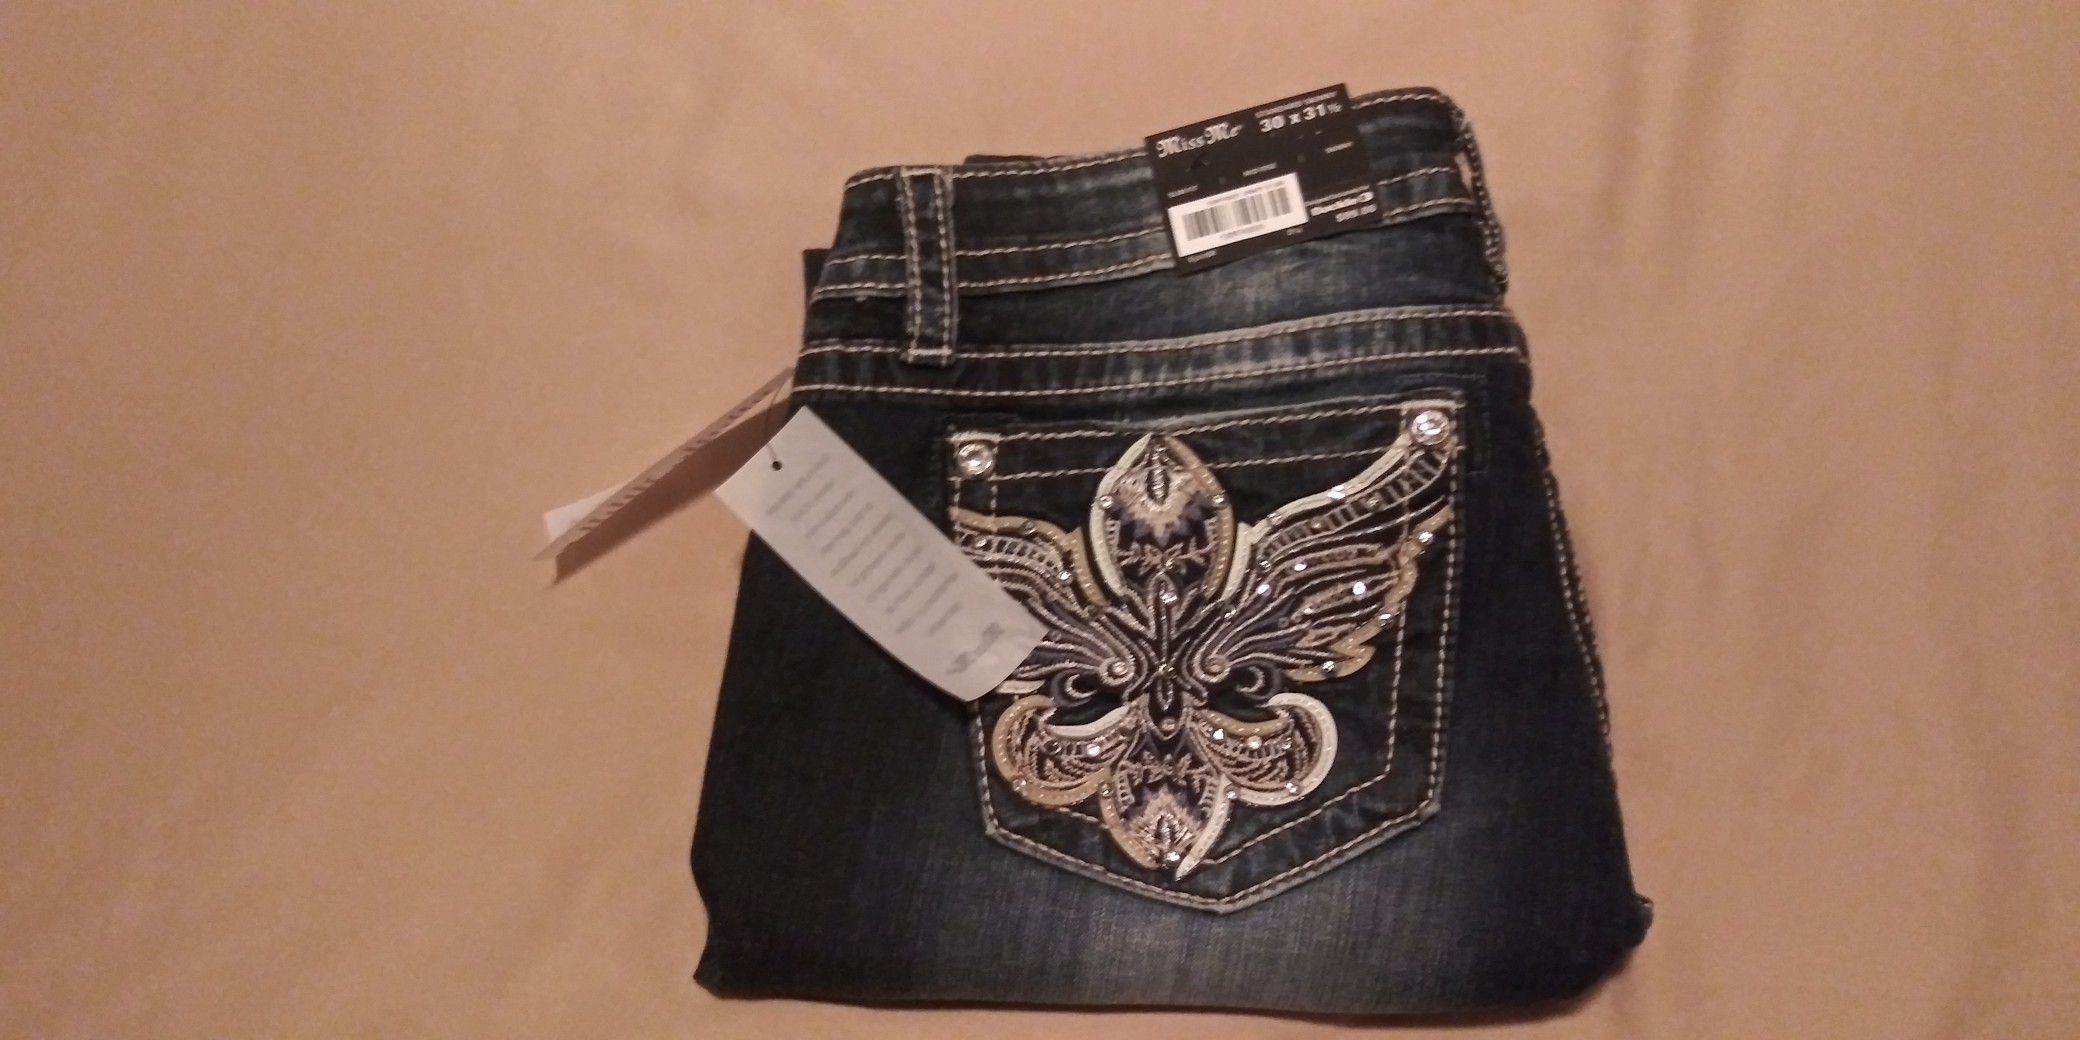 Miss Me brand new size 30/31 never wore firm on the price.